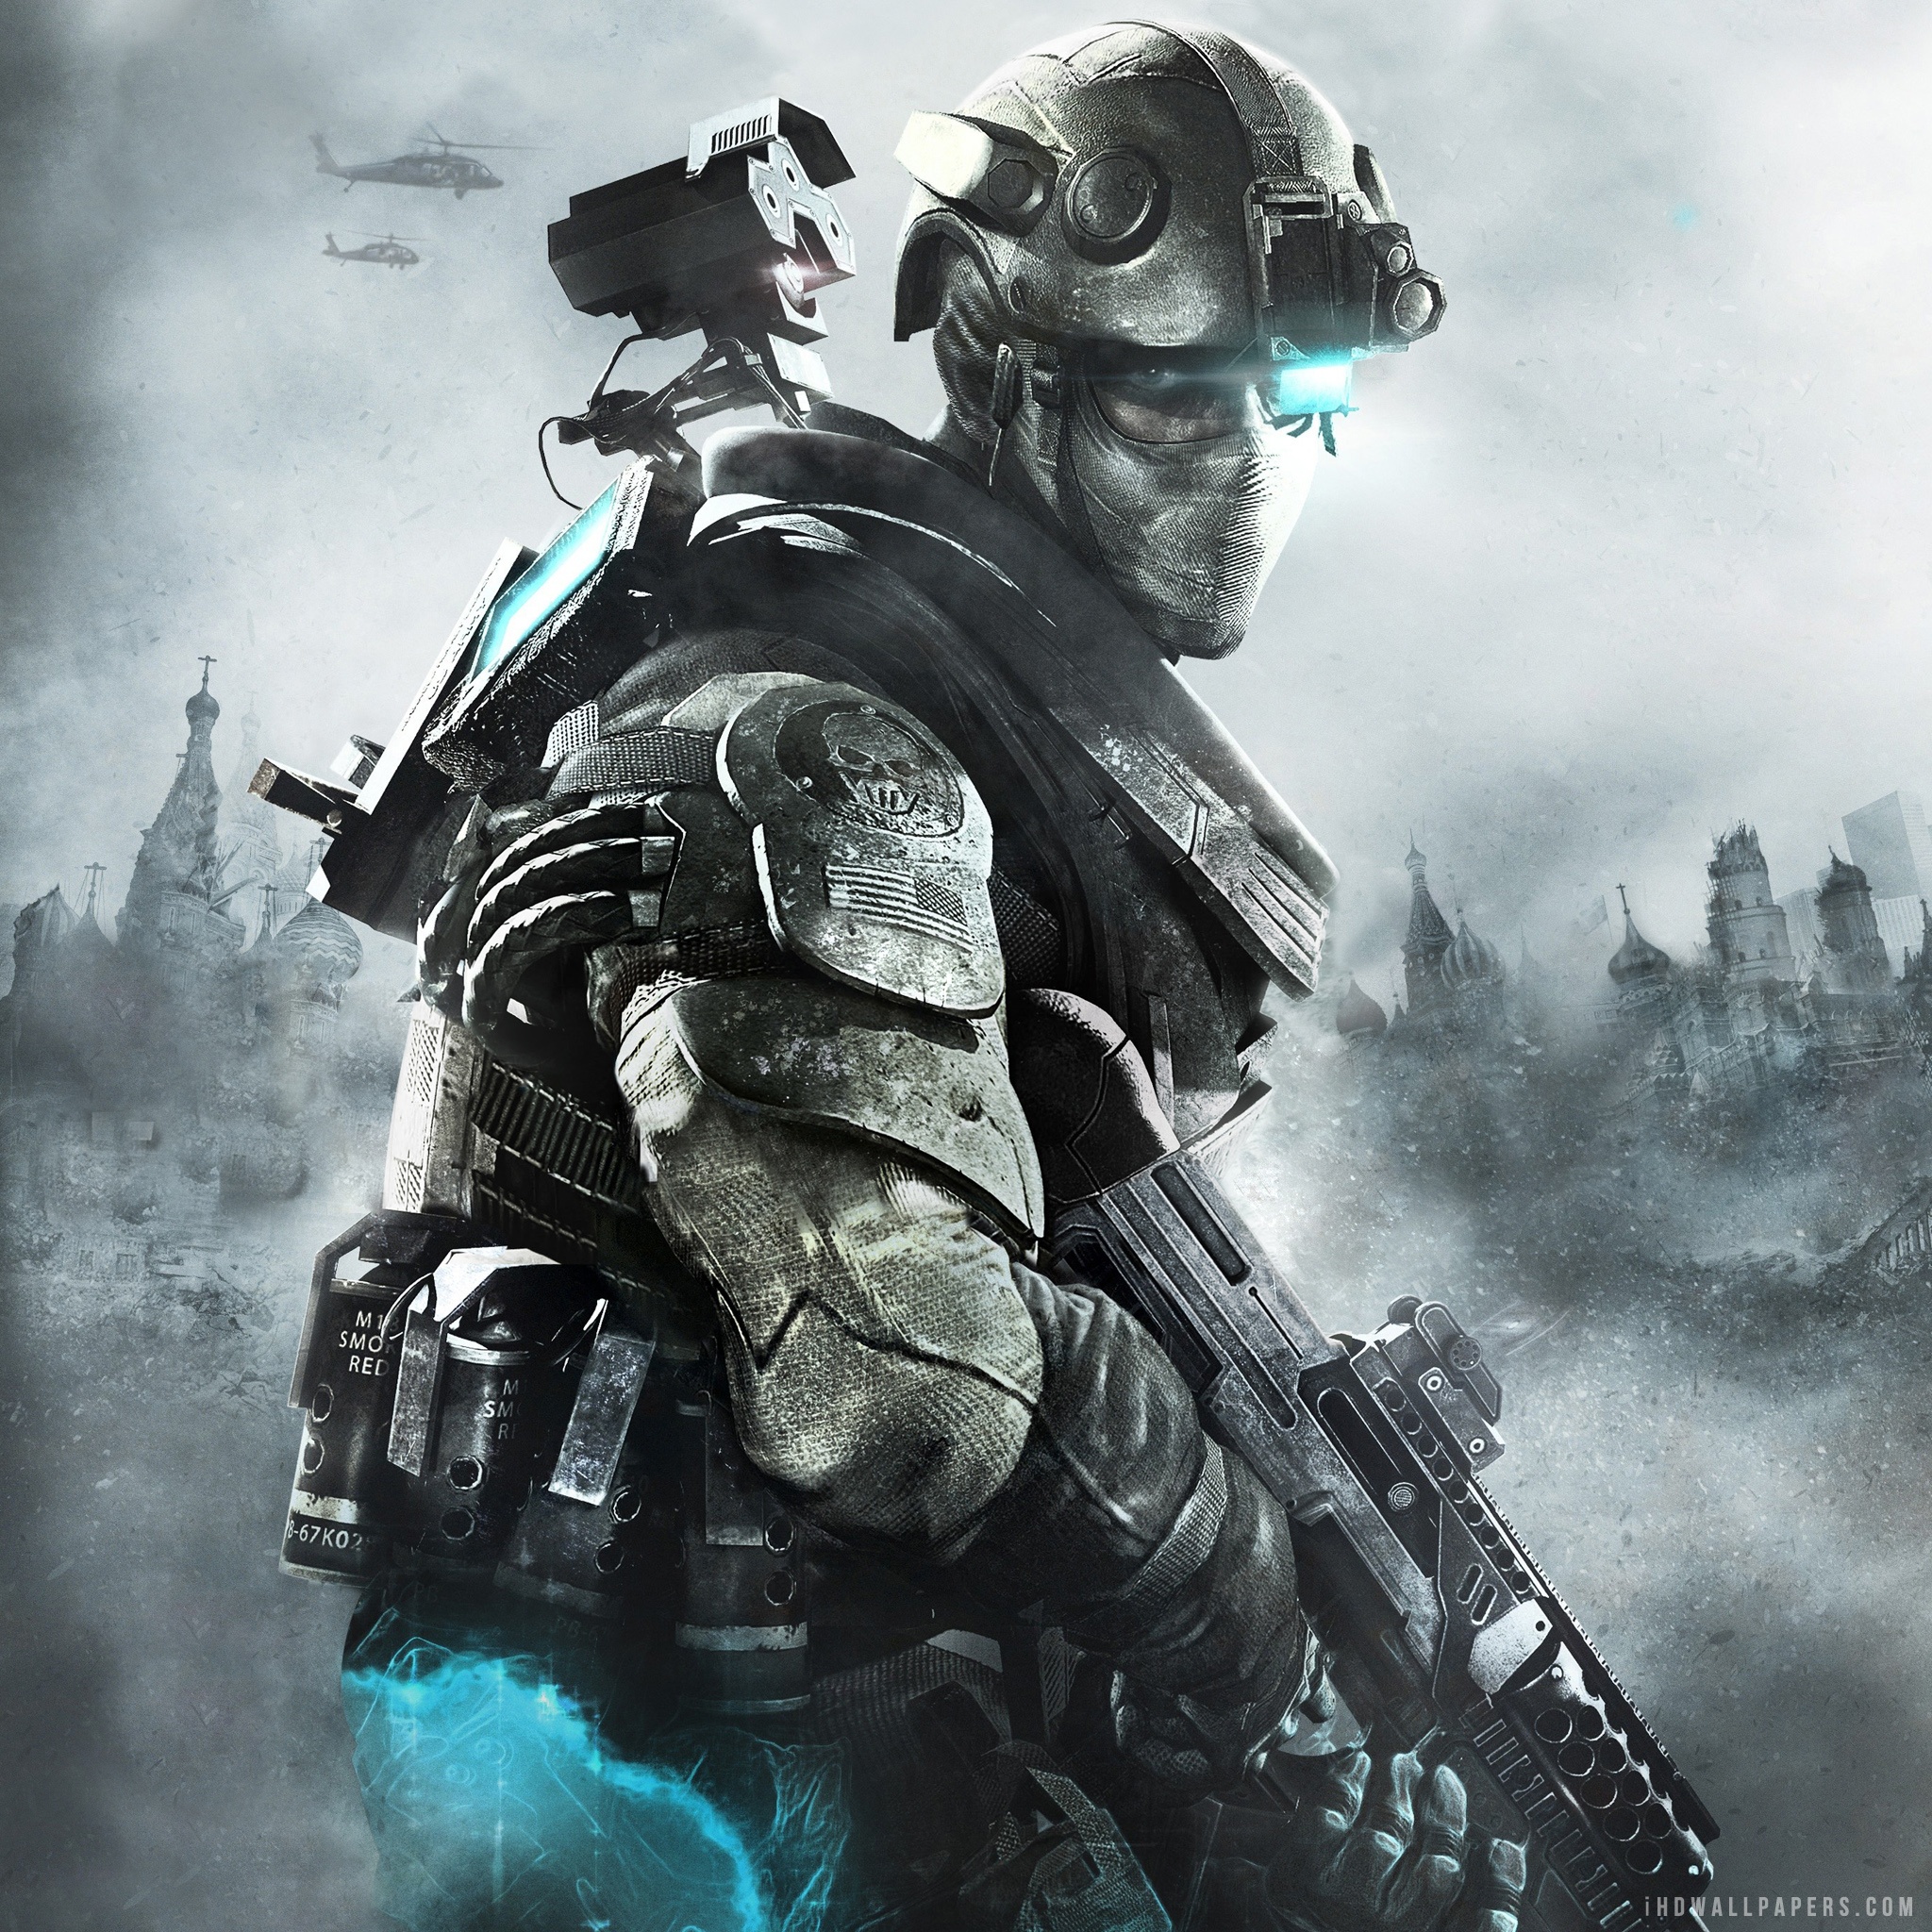 ghost recon future soldier wallpaper,action adventure game,pc game,games,shooter game,cg artwork